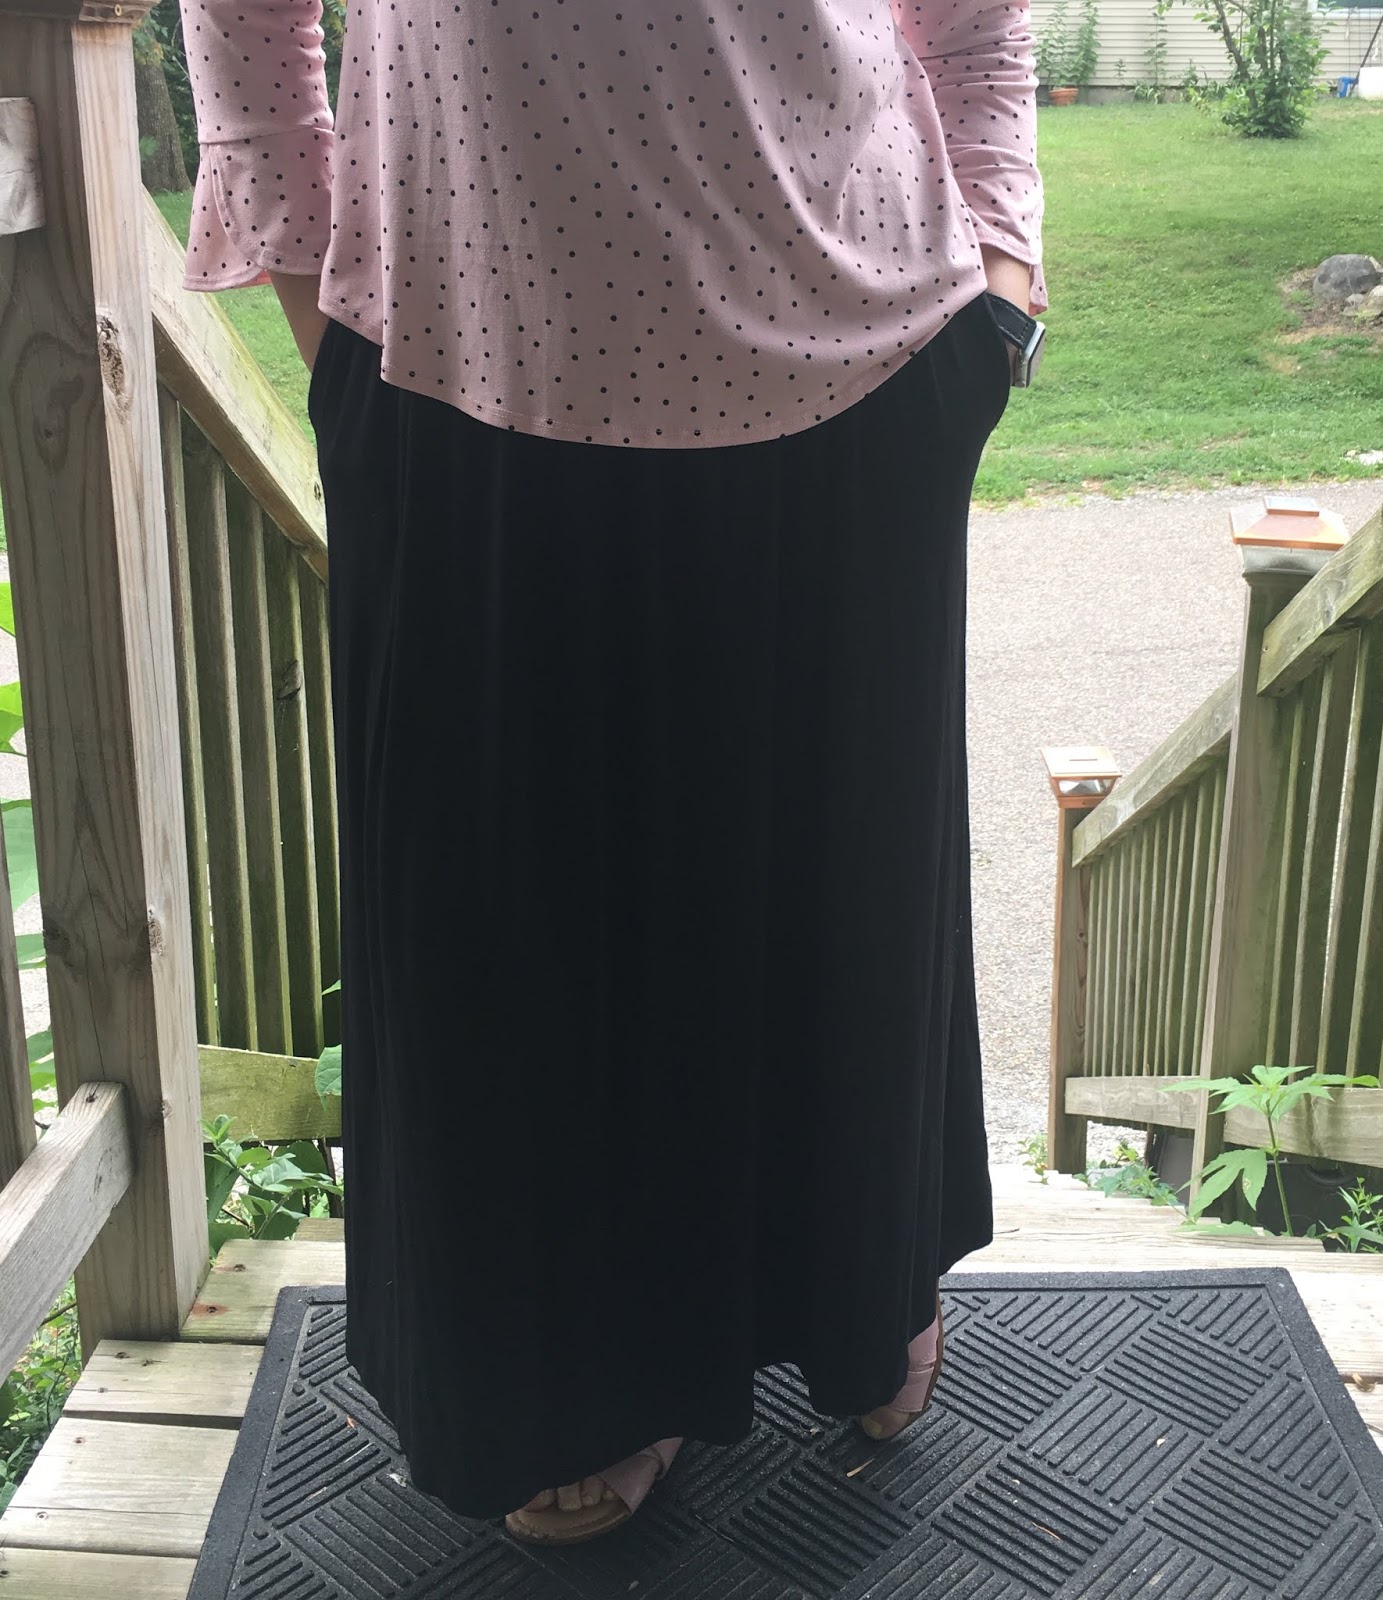 Kosher Casual Modest Fashion Review and #Giveaway